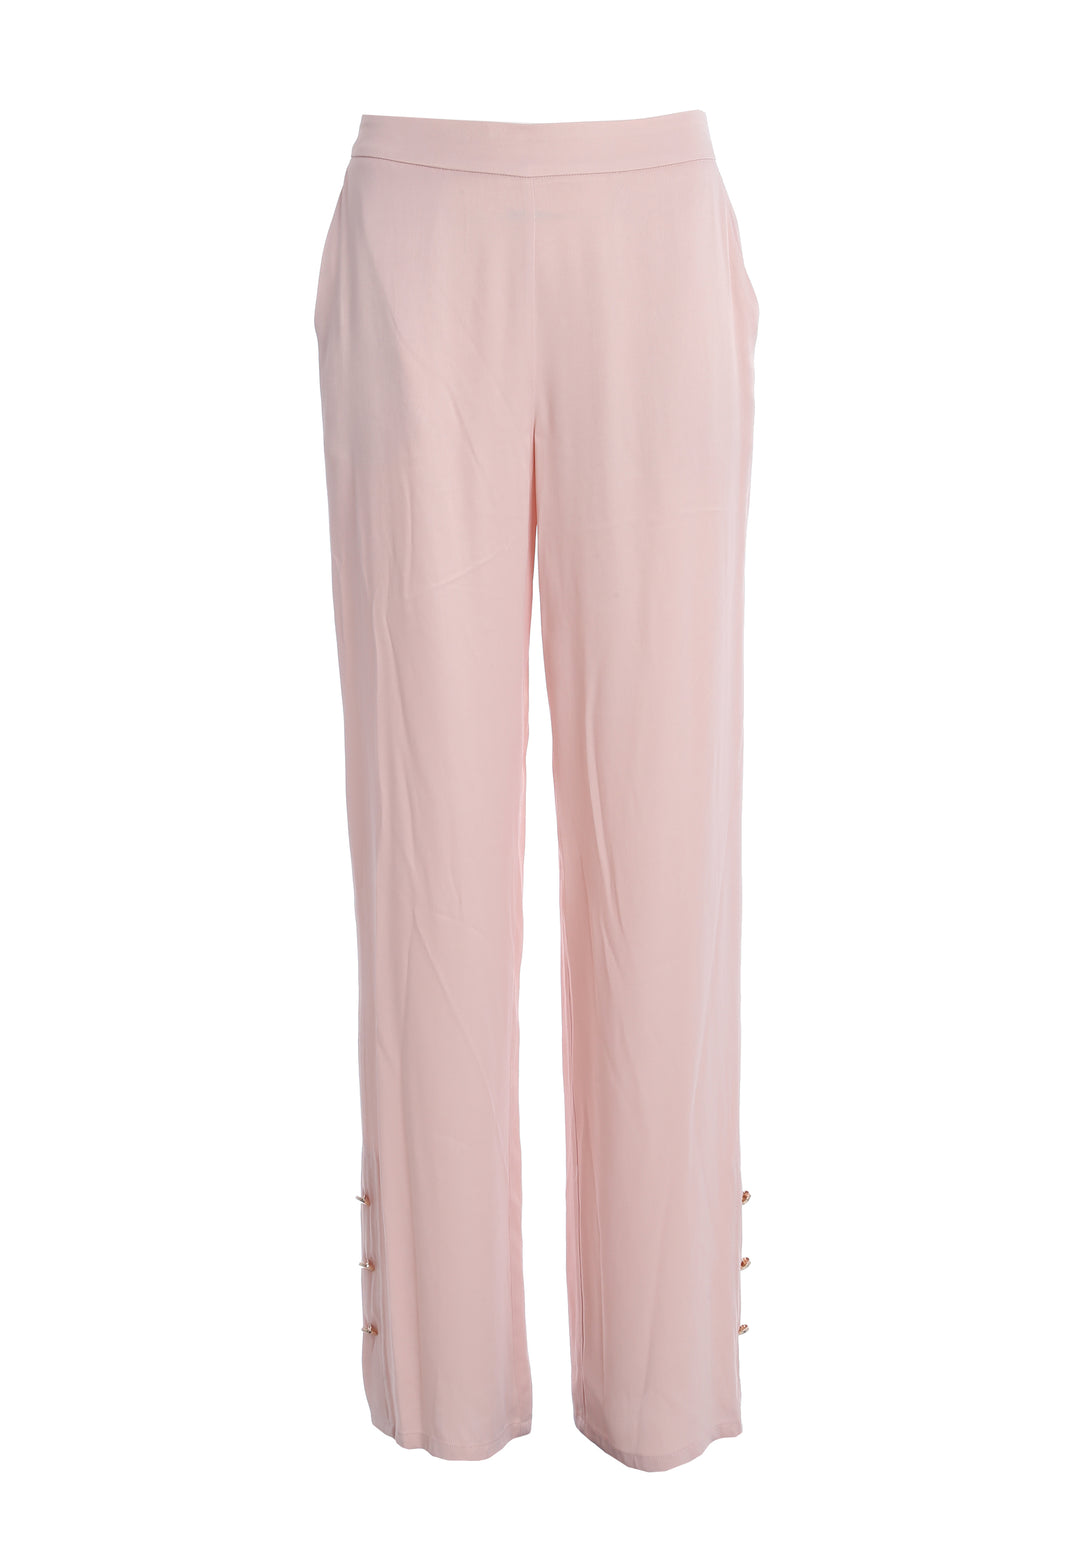 Palazzo pant flare made in satin